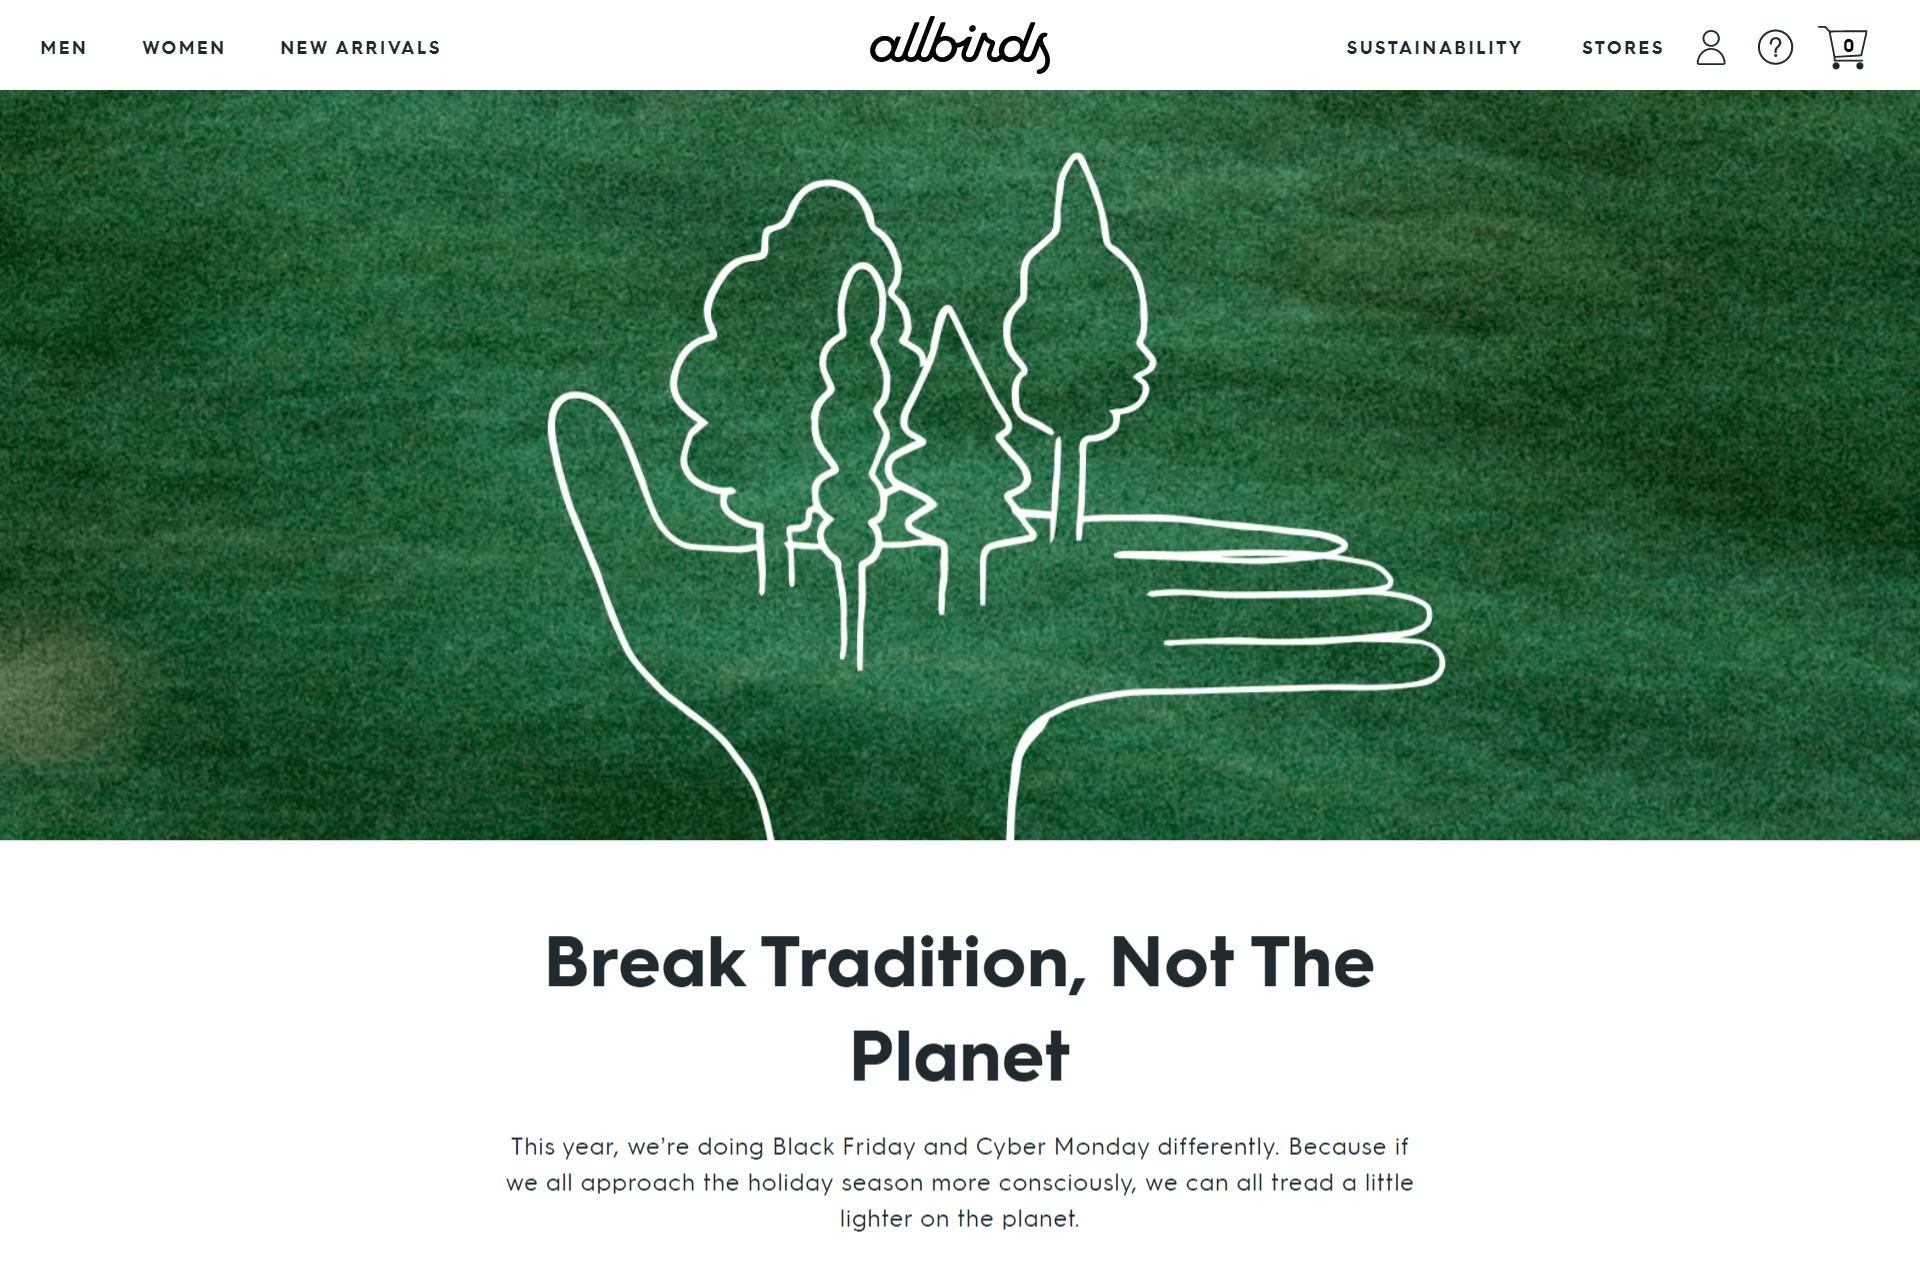 On Allbirds' Black Friday web page, the top image depicts an open human hand from which trees are growing. The title reads “Break tradition, not the planet”